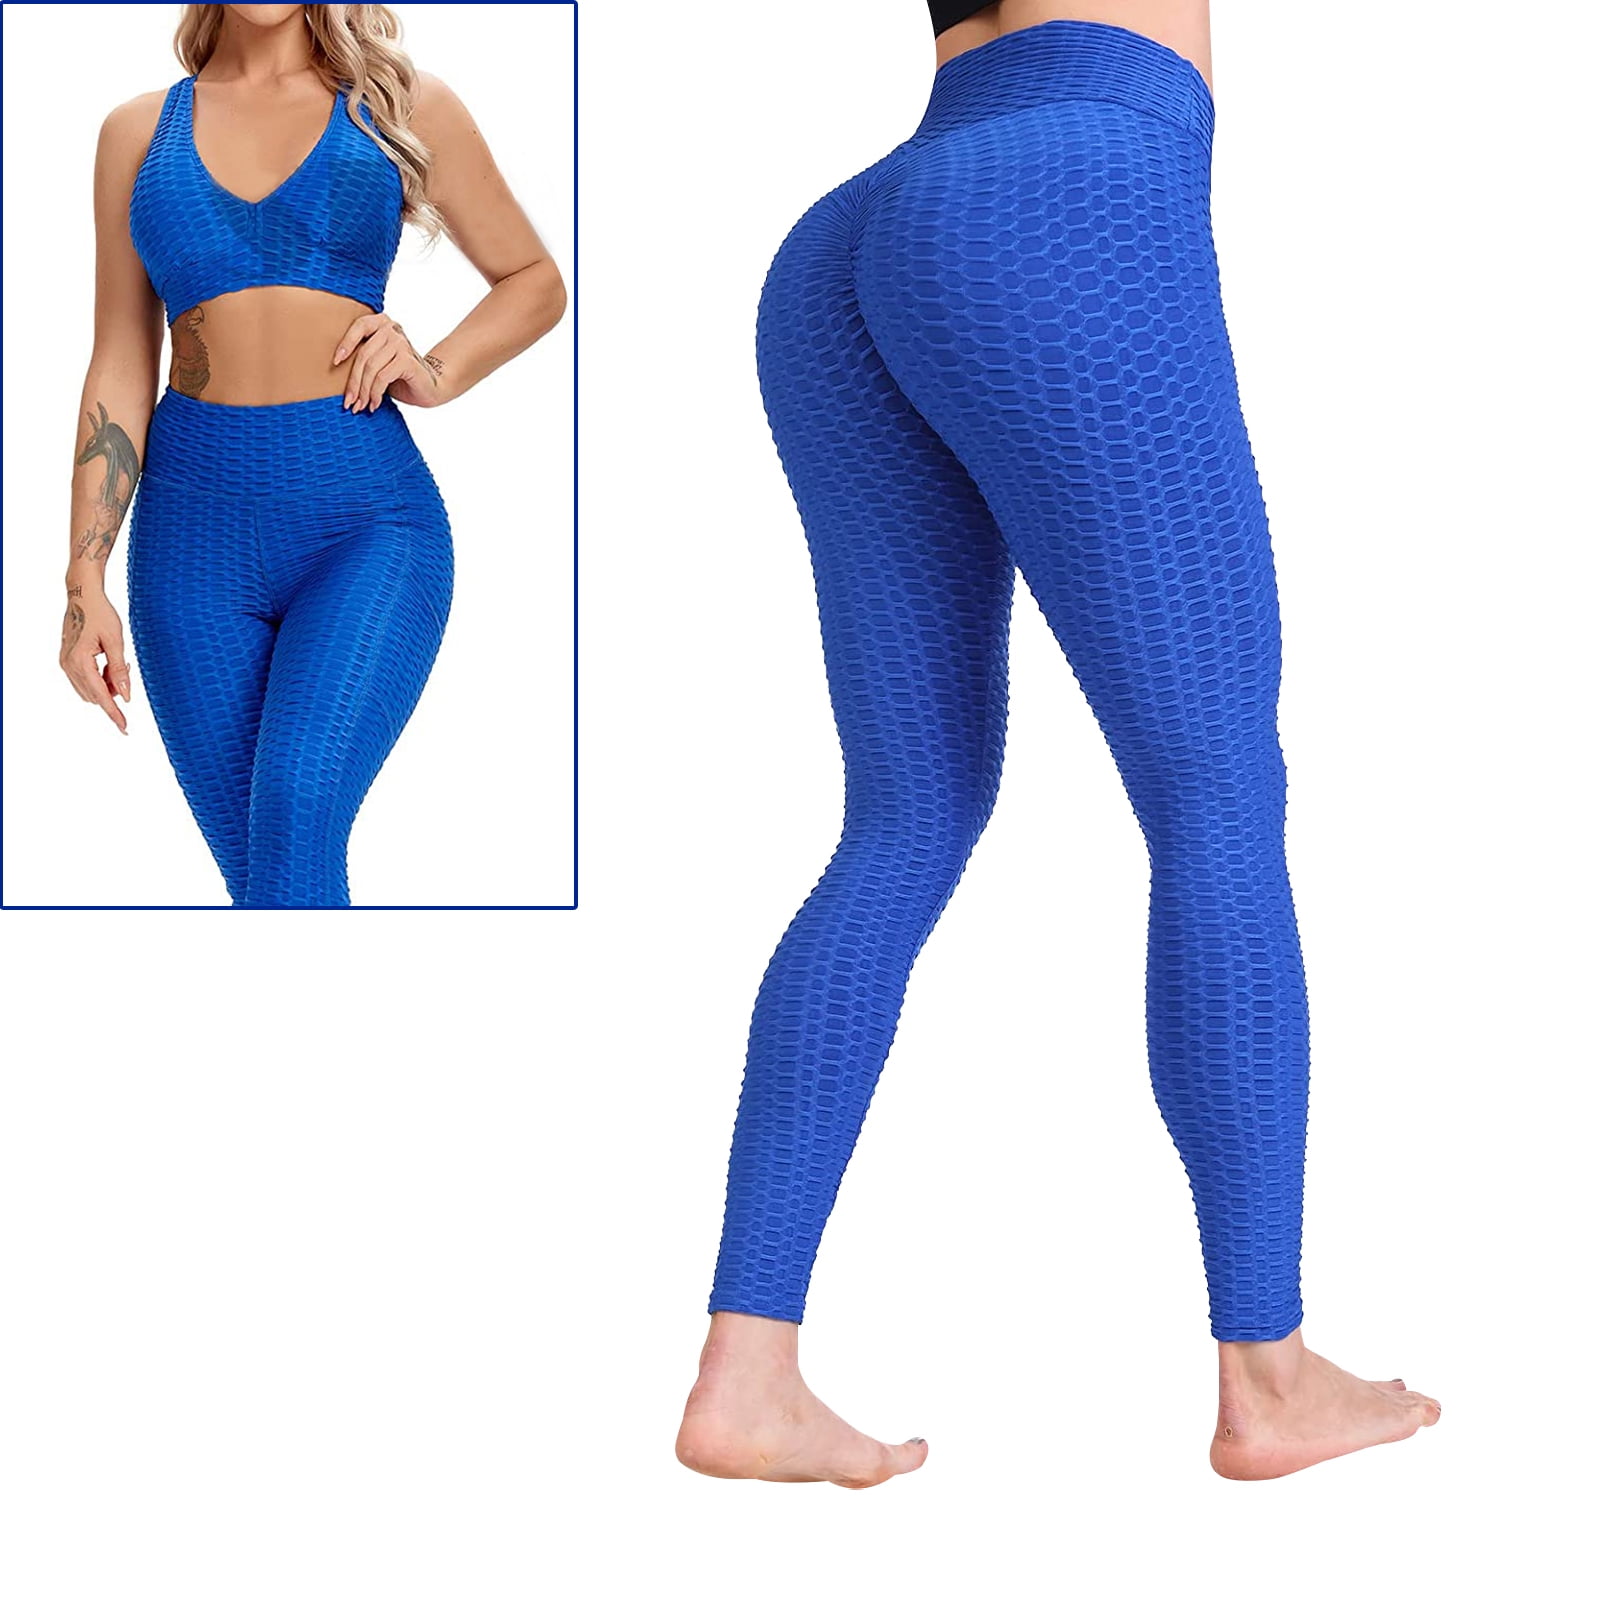 Anti Cellulite Tiktok Yoga Pants For Women Comfortable, Butt Lift, Elastic,  Push Up Sports Wear For Gym, Fitness, And Workout From I_show, $9.74